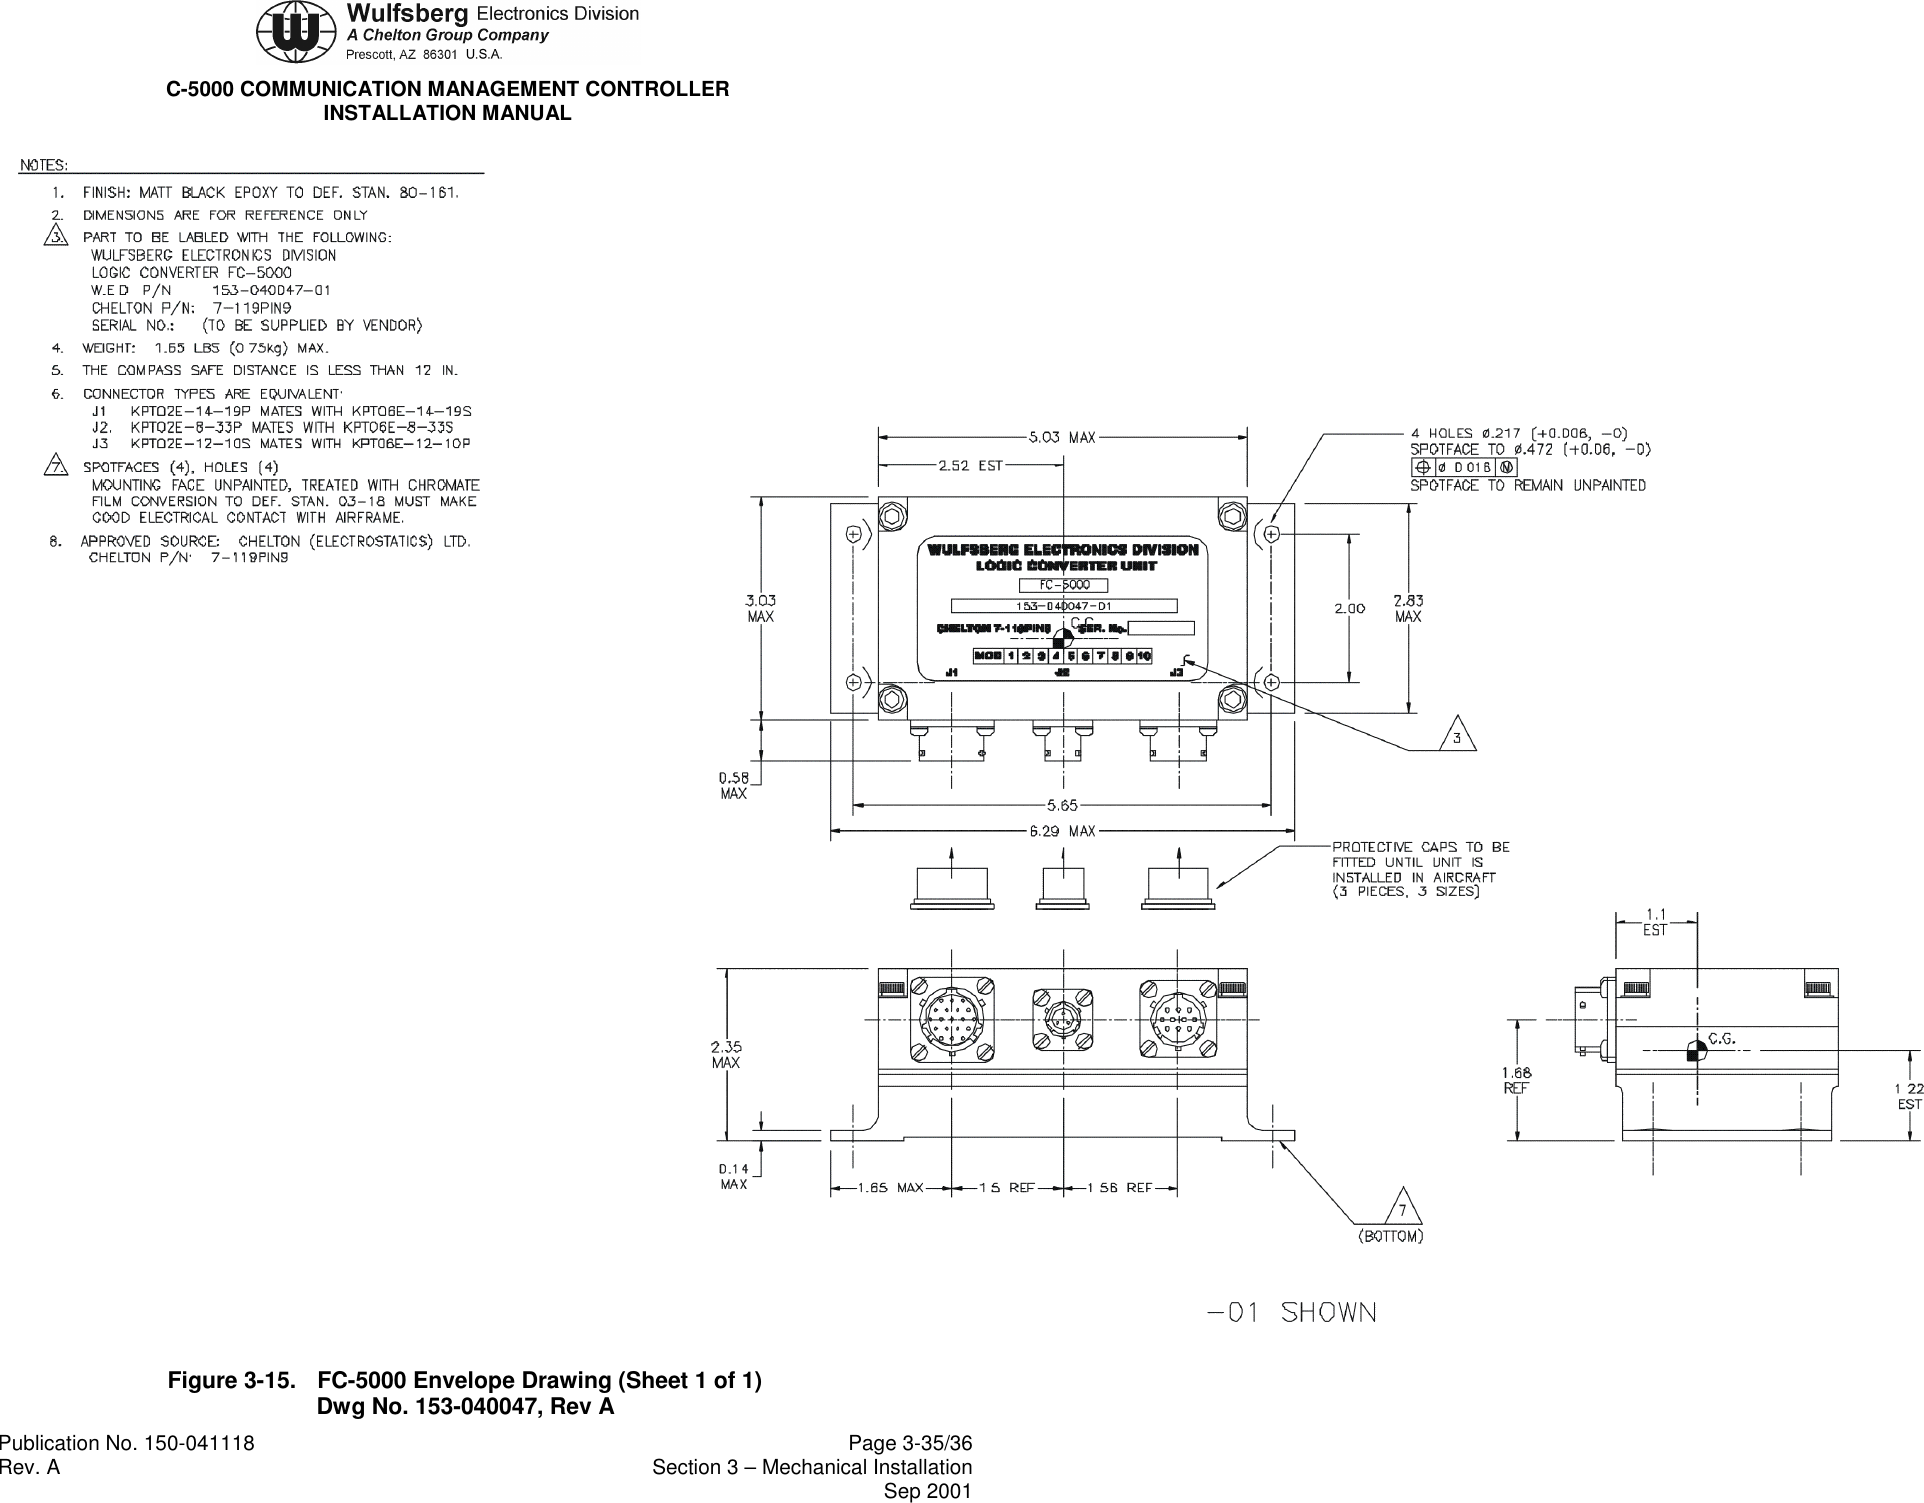 C-5000 COMMUNICATION MANAGEMENT CONTROLLERINSTALLATION MANUALPublication No. 150-041118 Page 3-35/36Rev. A Section 3 – Mechanical InstallationSep 2001Figure 3-15. FC-5000 Envelope Drawing (Sheet 1 of 1)Dwg No. 153-040047, Rev A